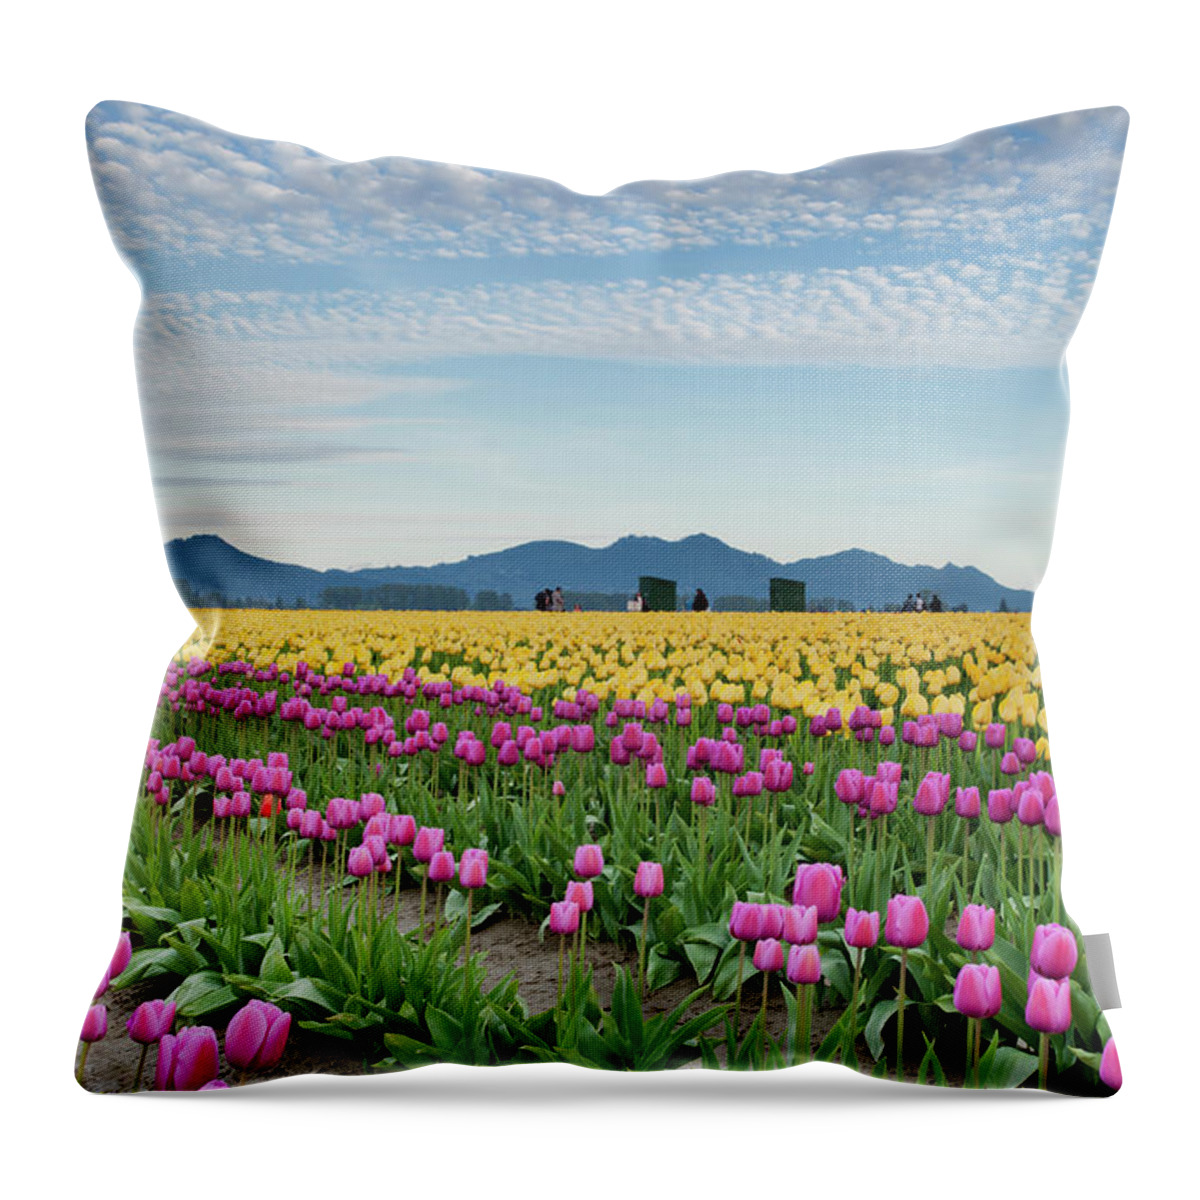 Scenics Throw Pillow featuring the photograph Rows Of Pink And Yellow Tulips At Farm by John & Lisa Merrill